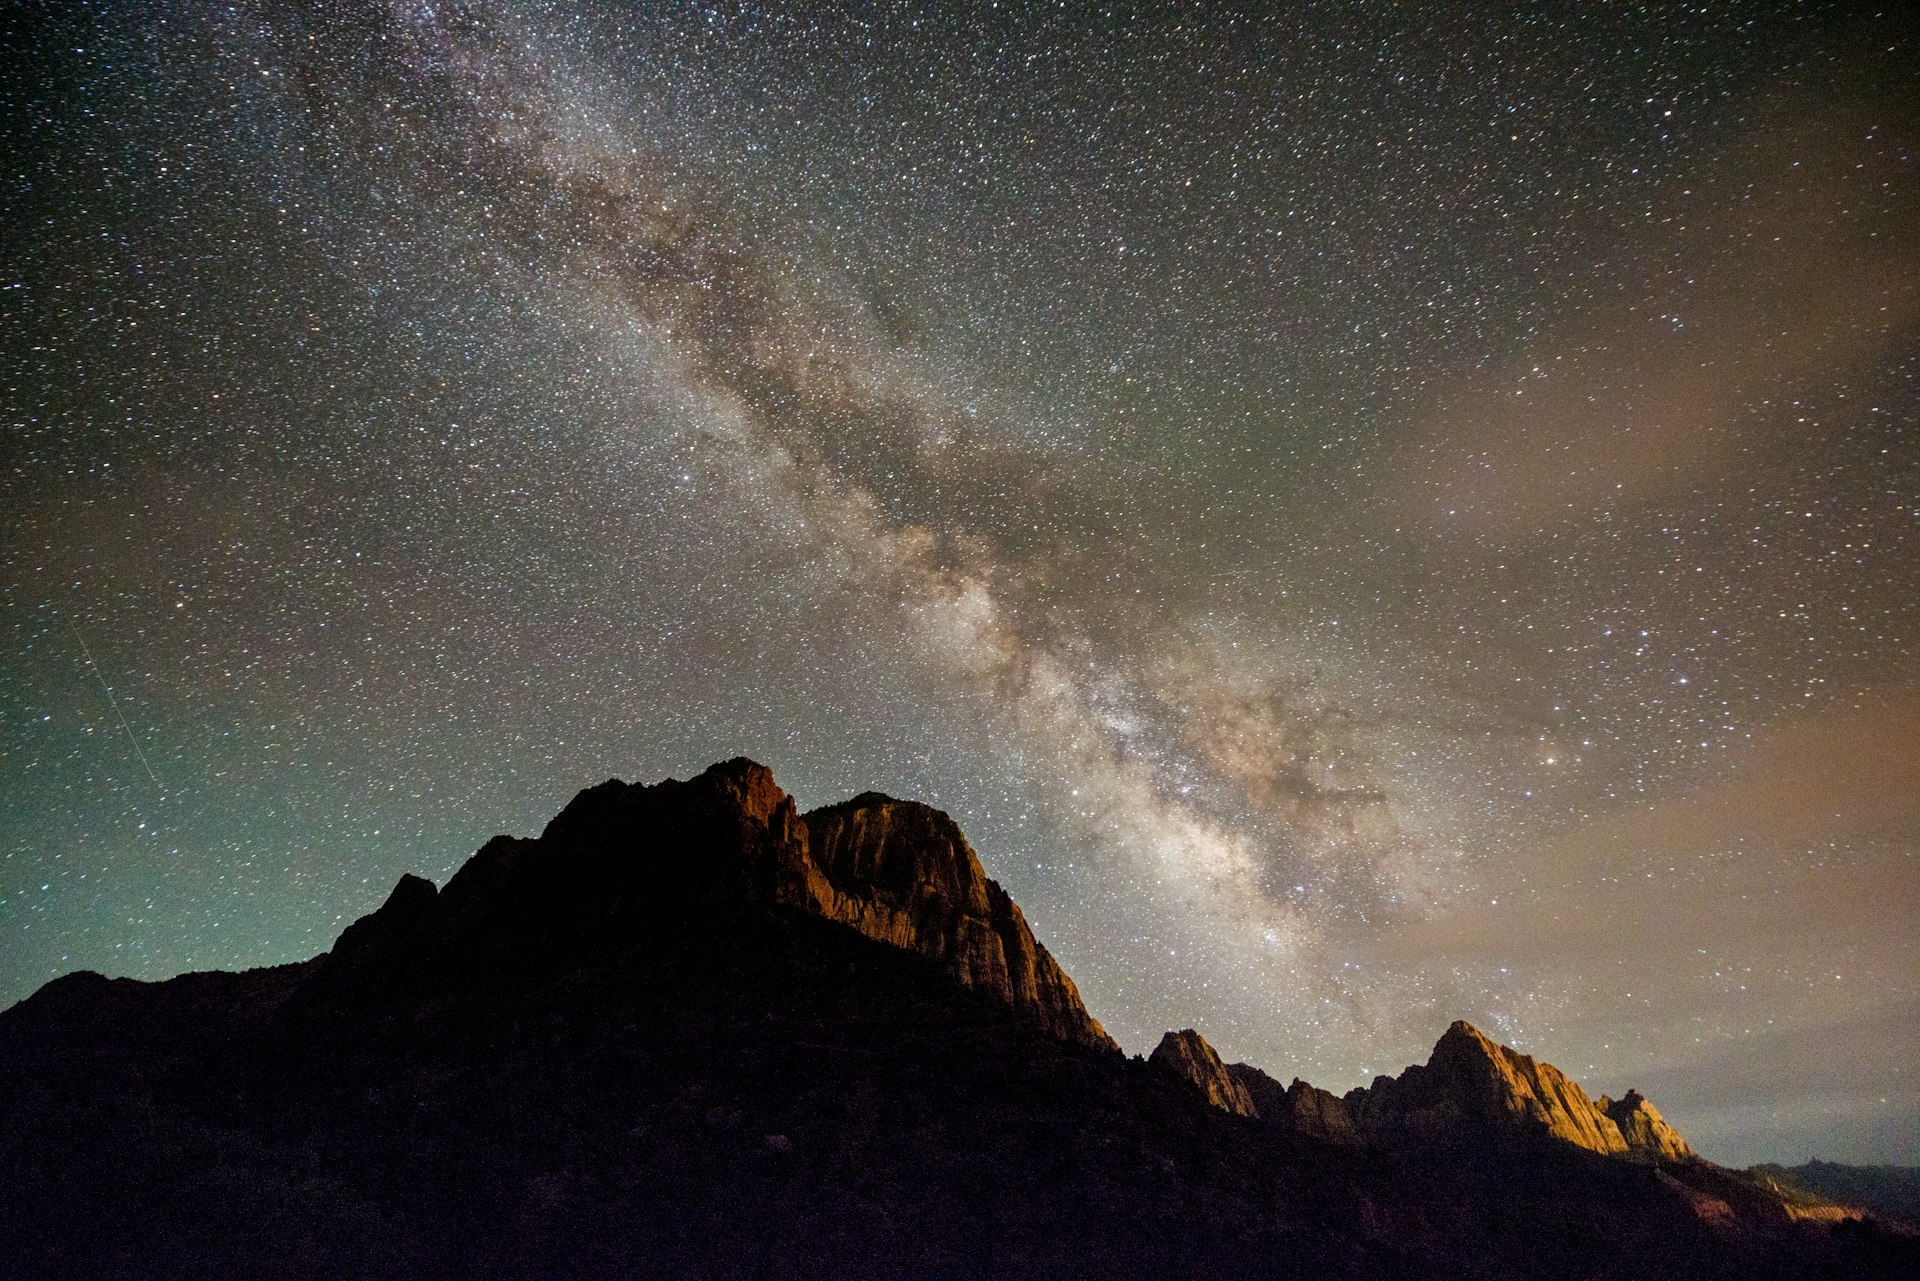 Milky Way night sky shines over the Watchman in Zion National Park. 